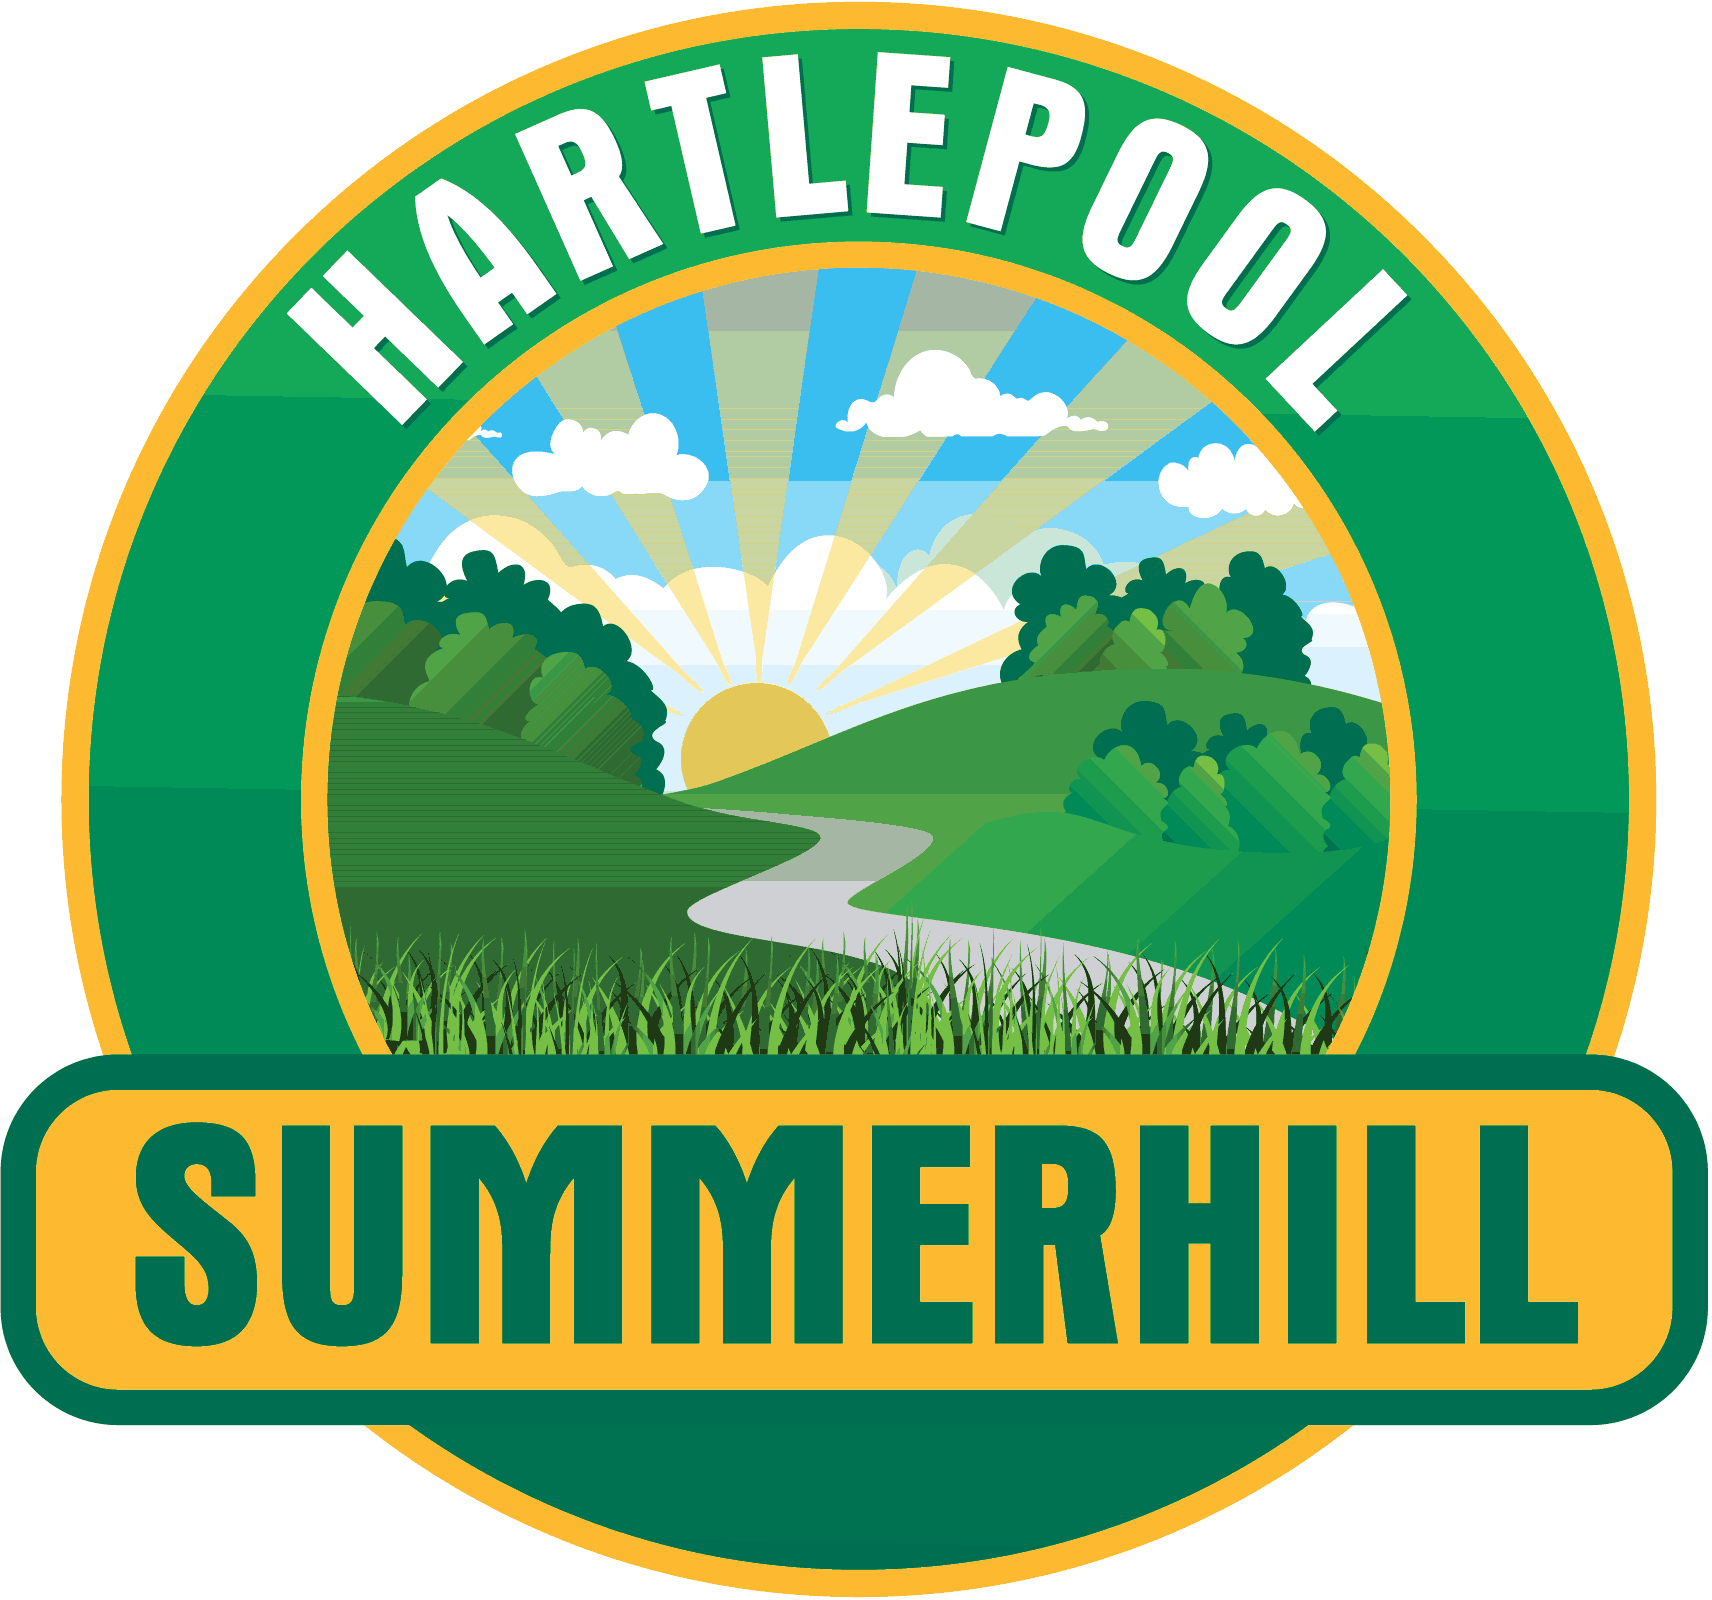 Clipart park country park. Summerhill get hartlepool active